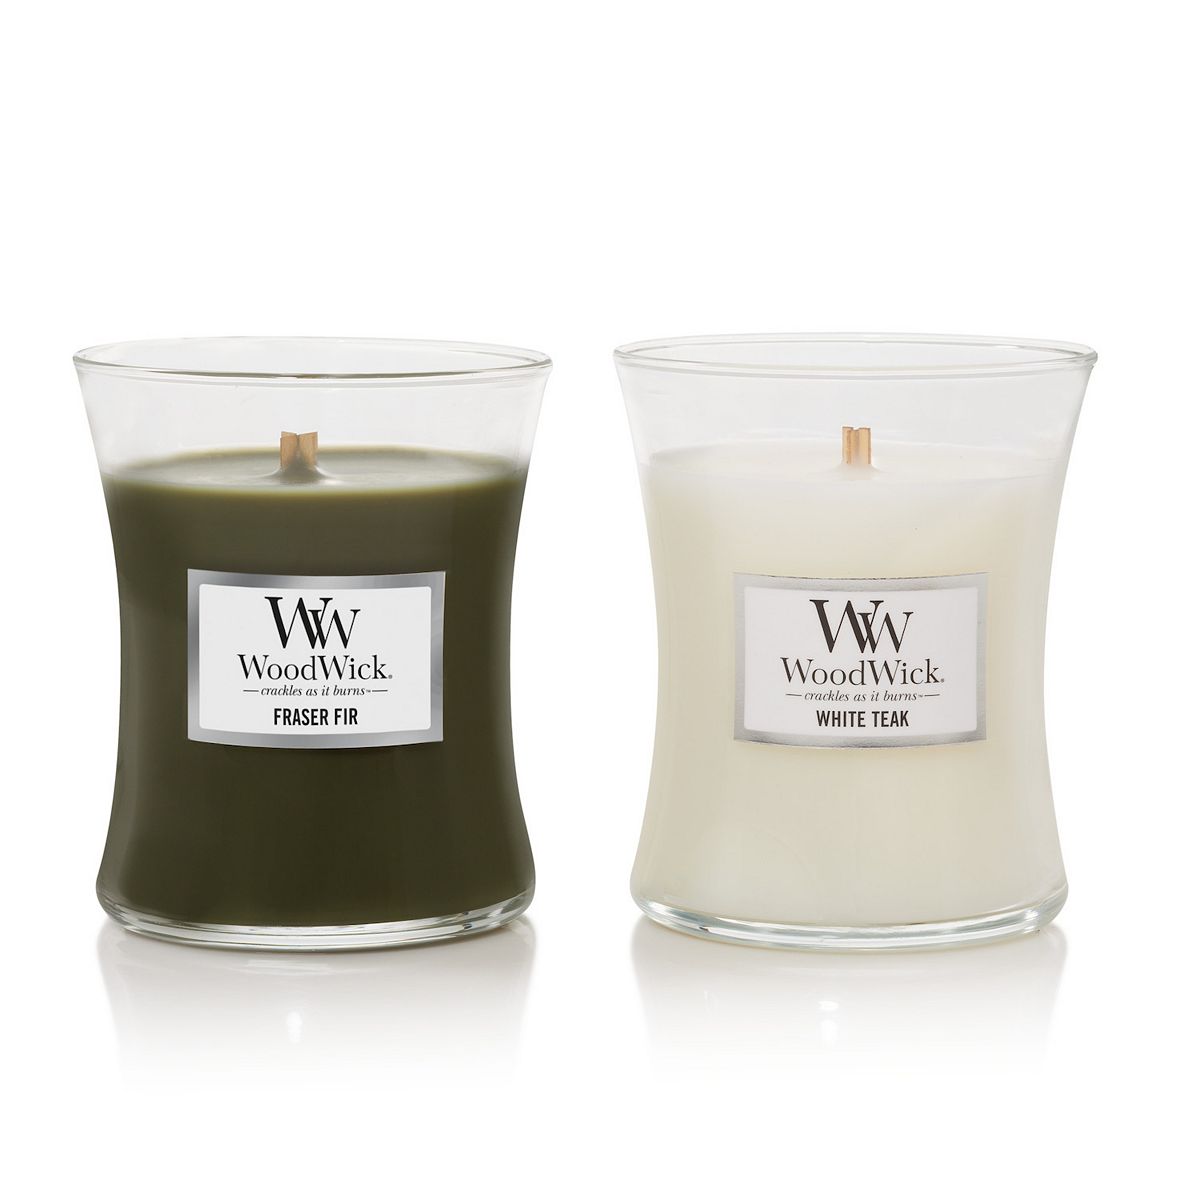 2-Piece 9.7-Oz WoodWick Hourglass Fraser Fir & White Teak Candle Jar Set $11.89 ($5.95 Each) + Free Shipping on Orders $49+